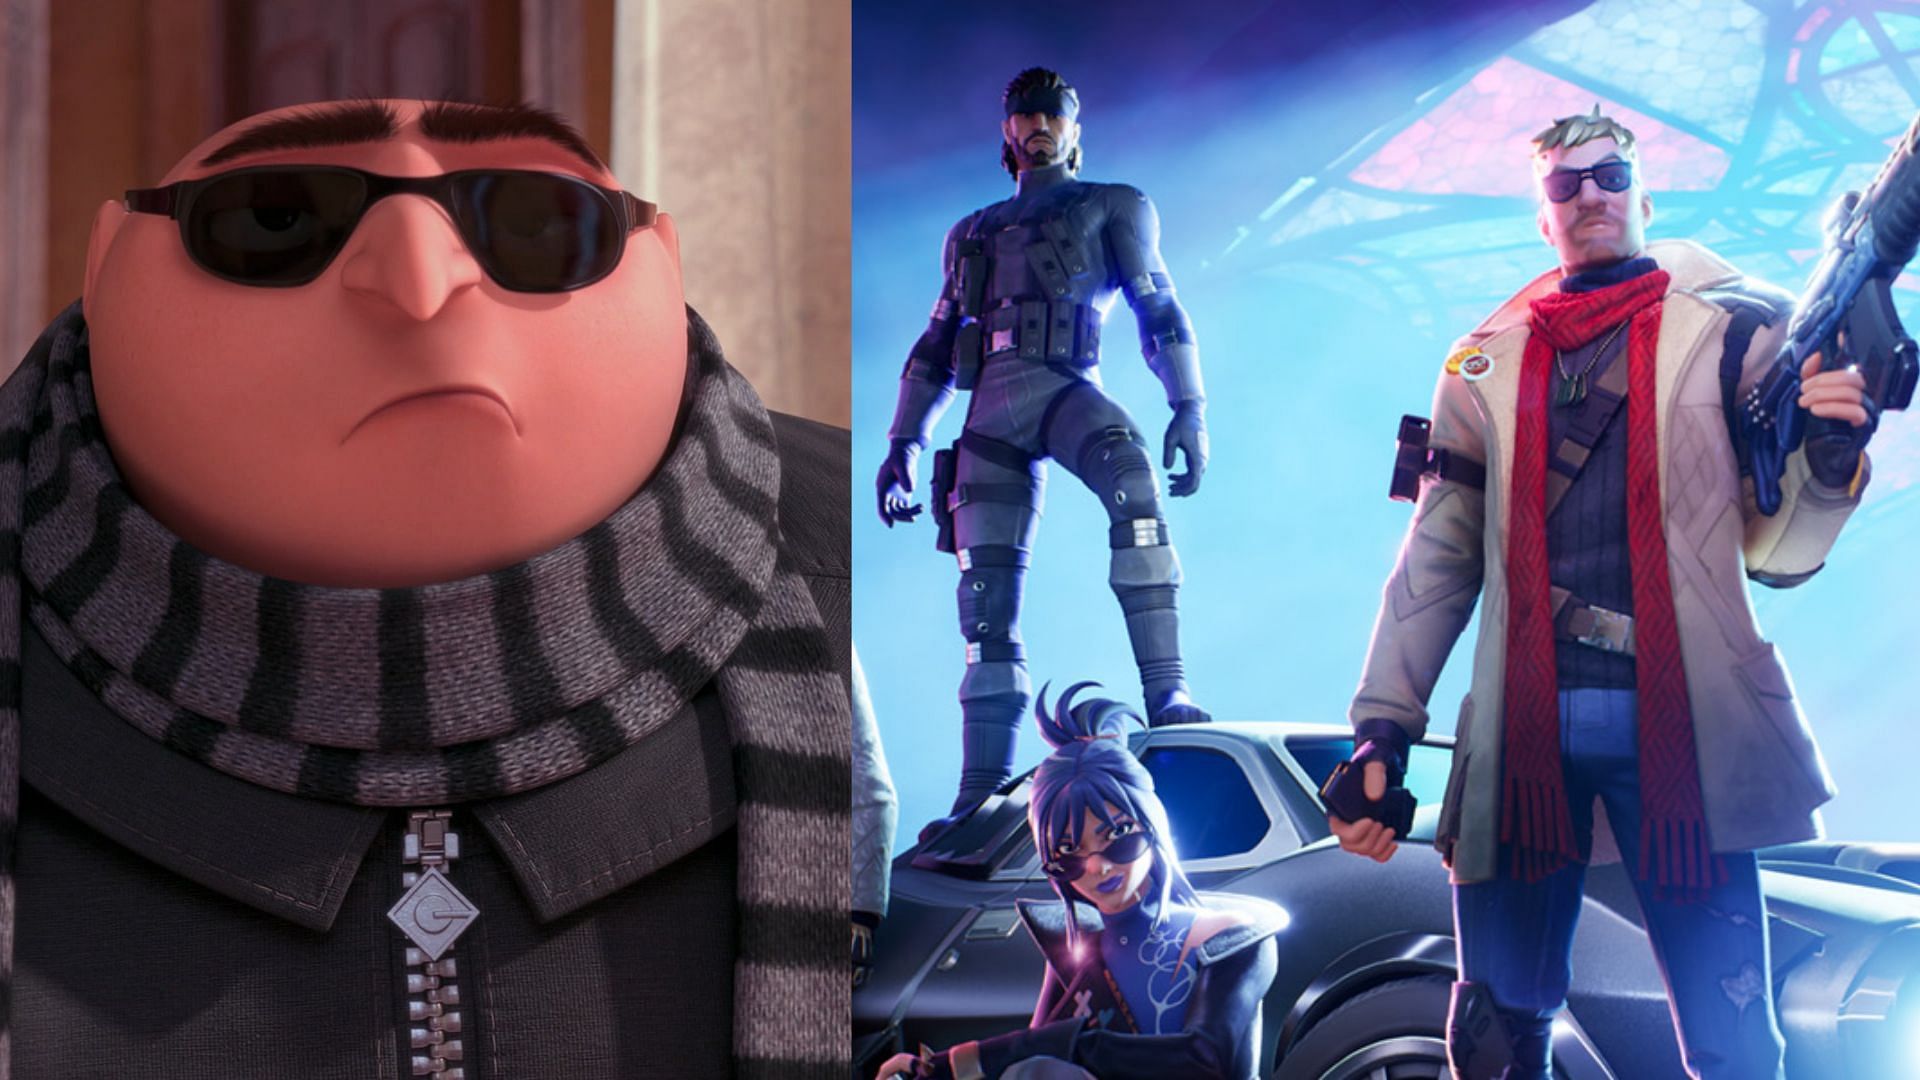 The Fortnite concept perfectly envisions a potential Despicable Me collaboration. (Image via Illumination and Epic Games)